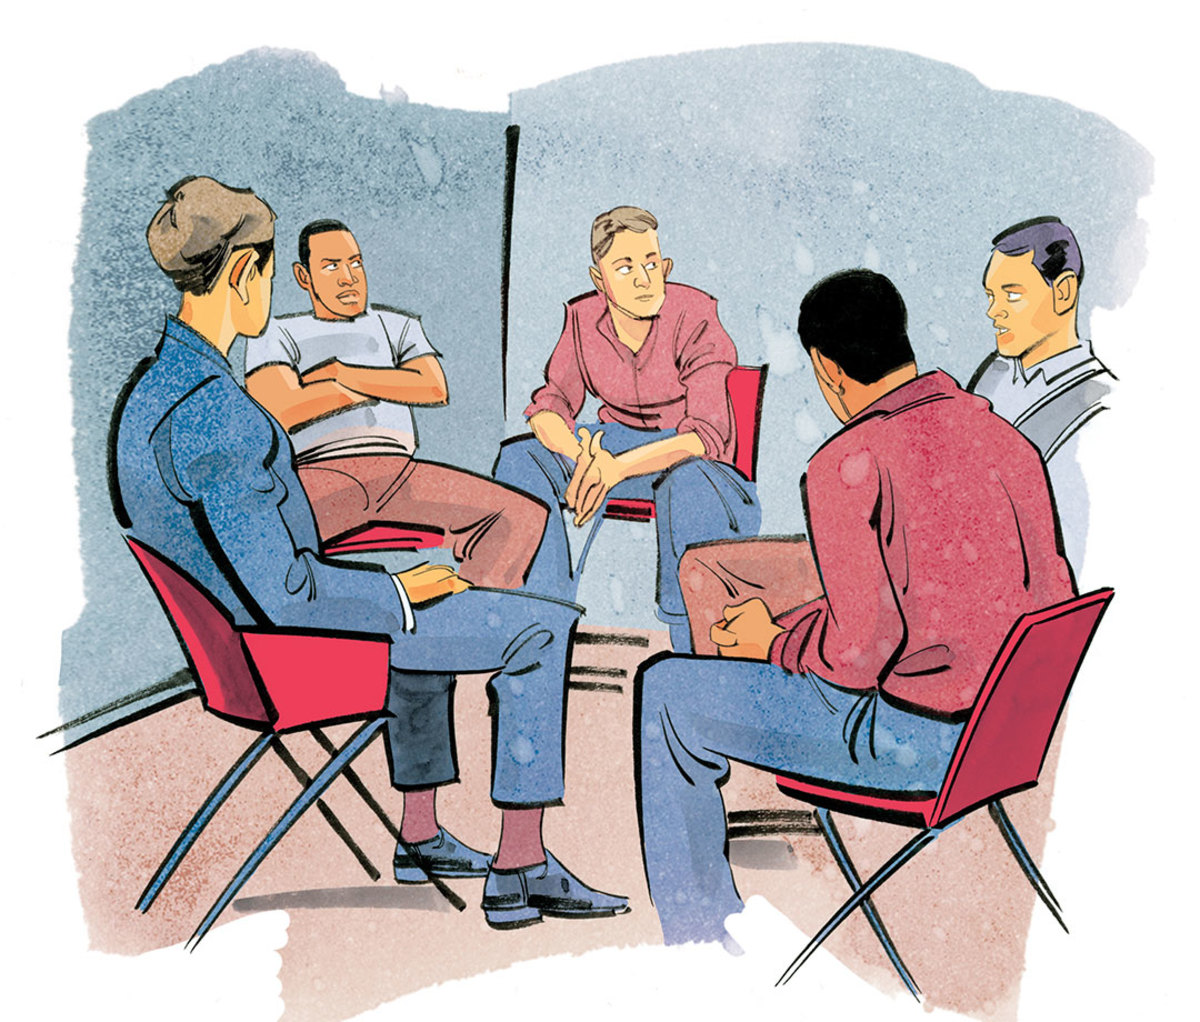 Illustration of men in group therapy